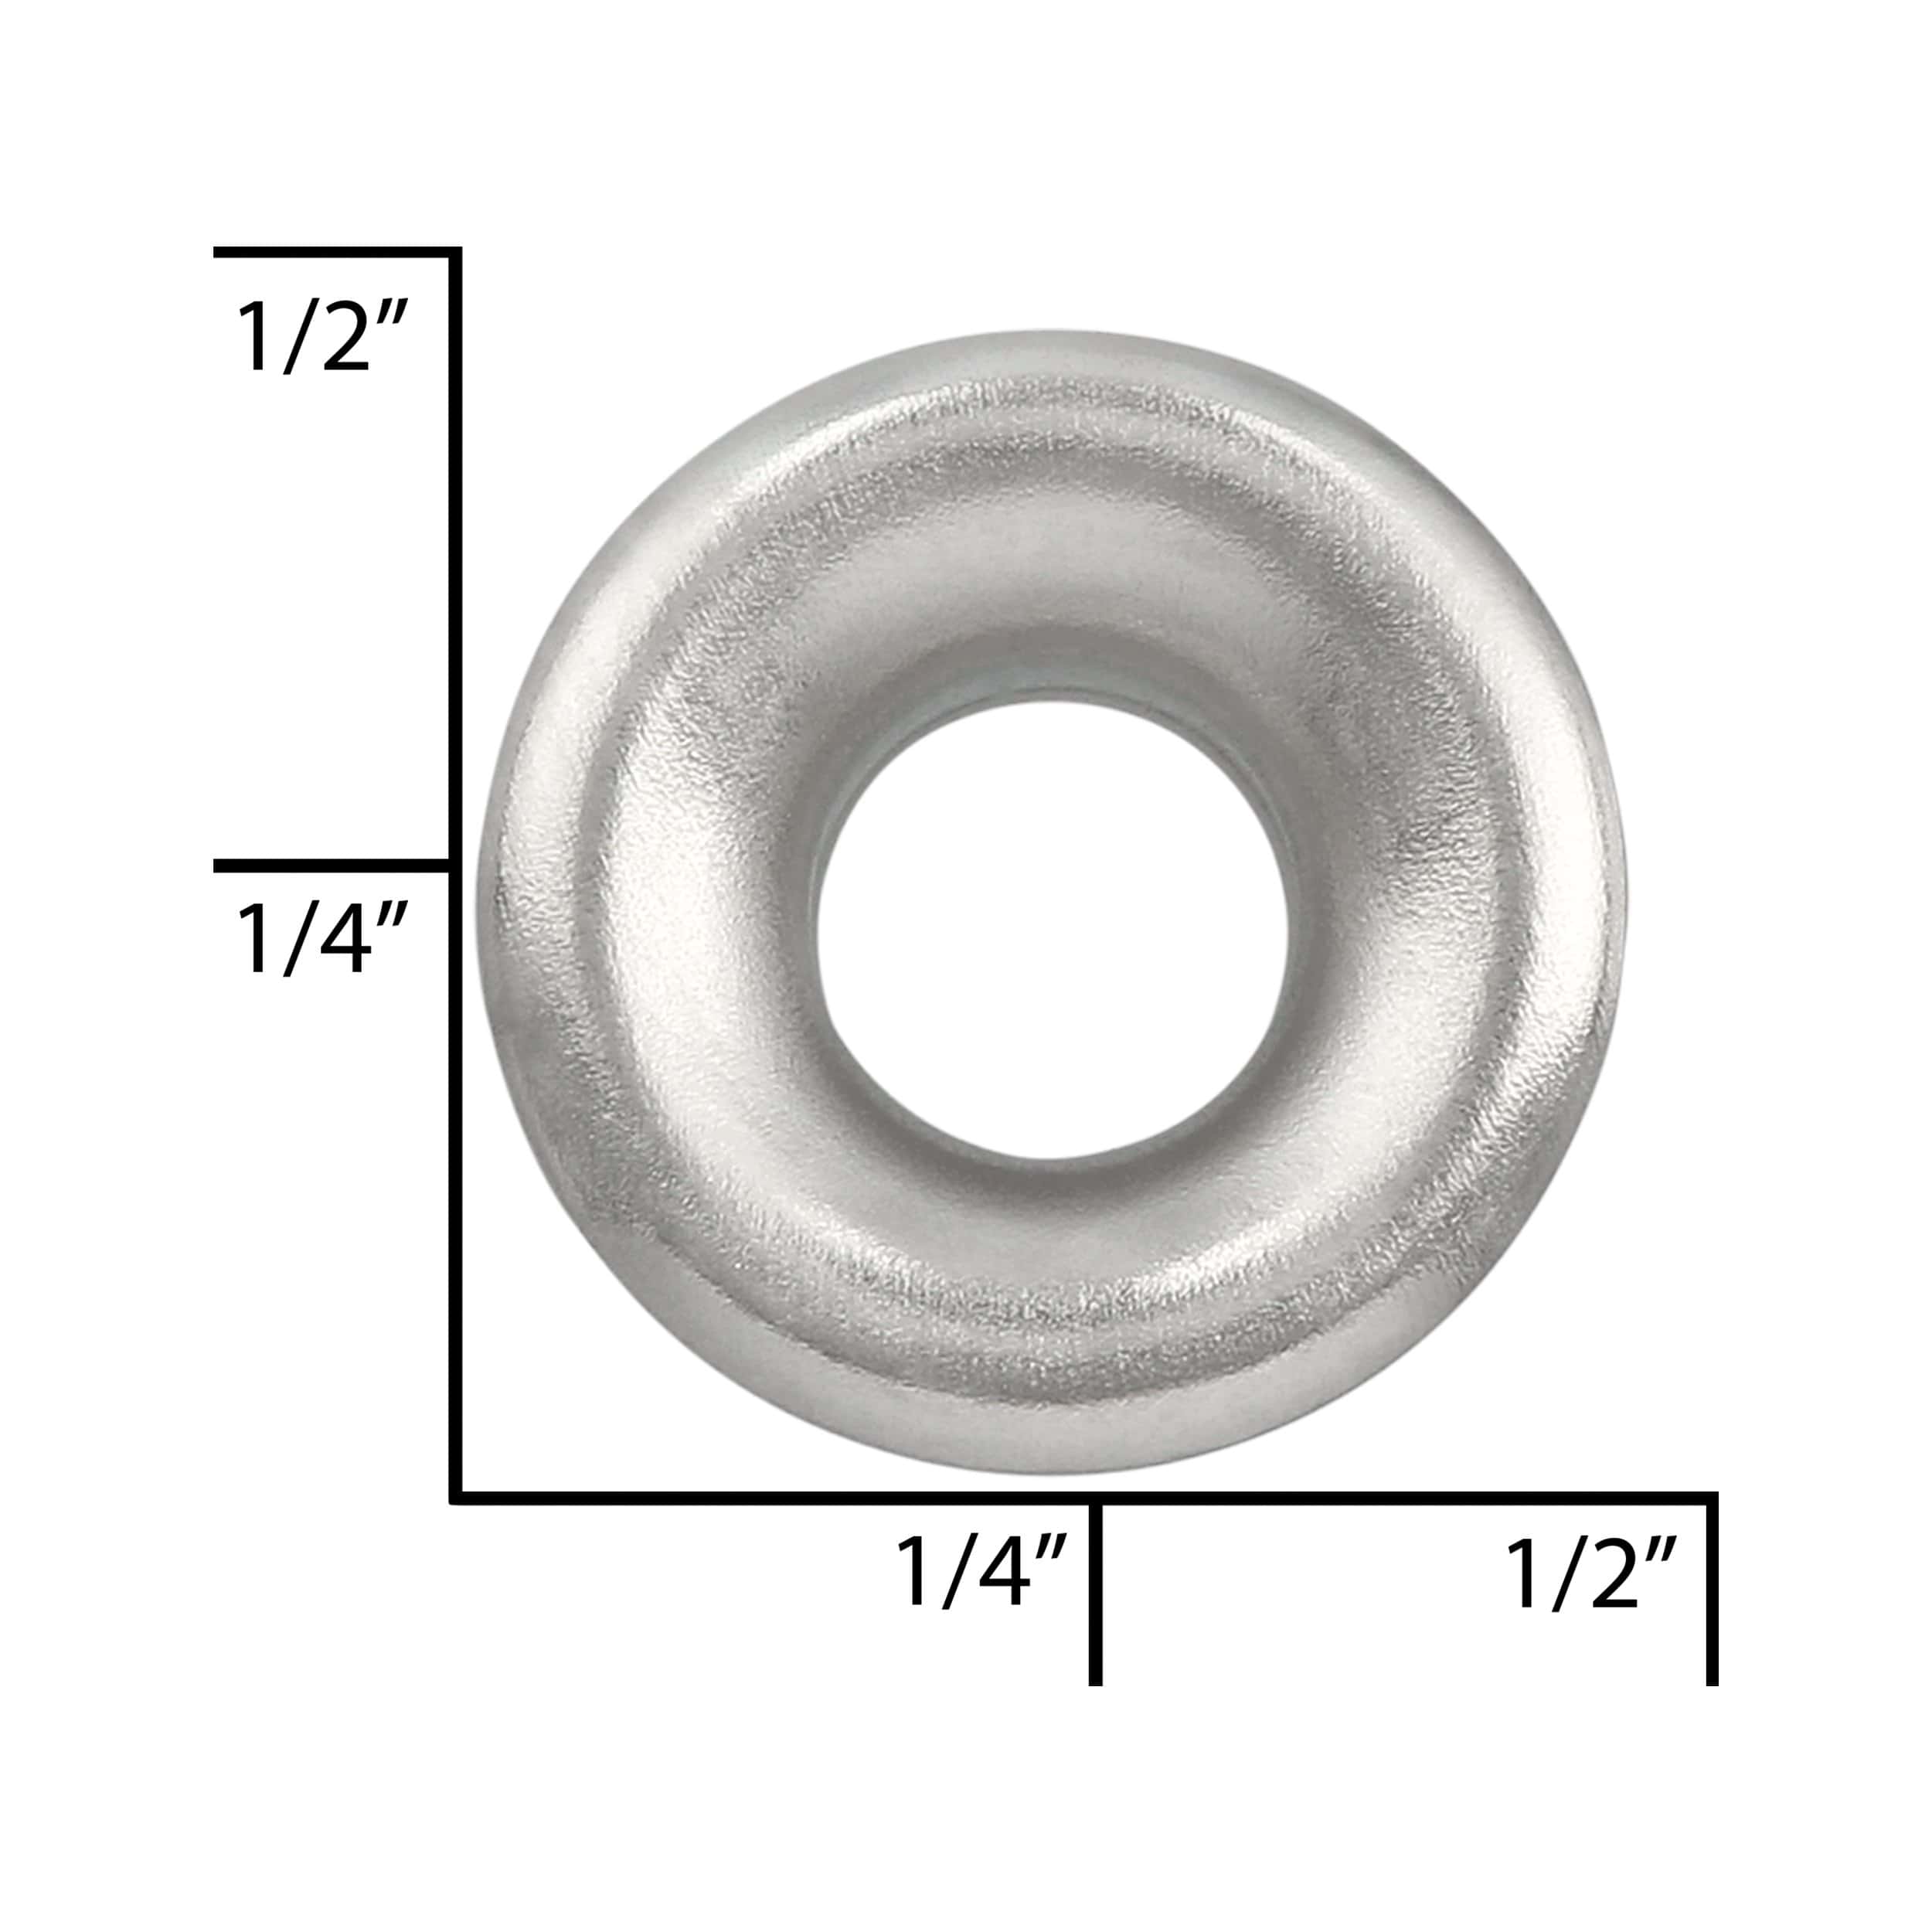 Ohio Travel Bag Fasteners #00 Nickel, Grommet with Washer, Solid Brass - 24 pk, #GROM-00-SBN GROM-00-SBN